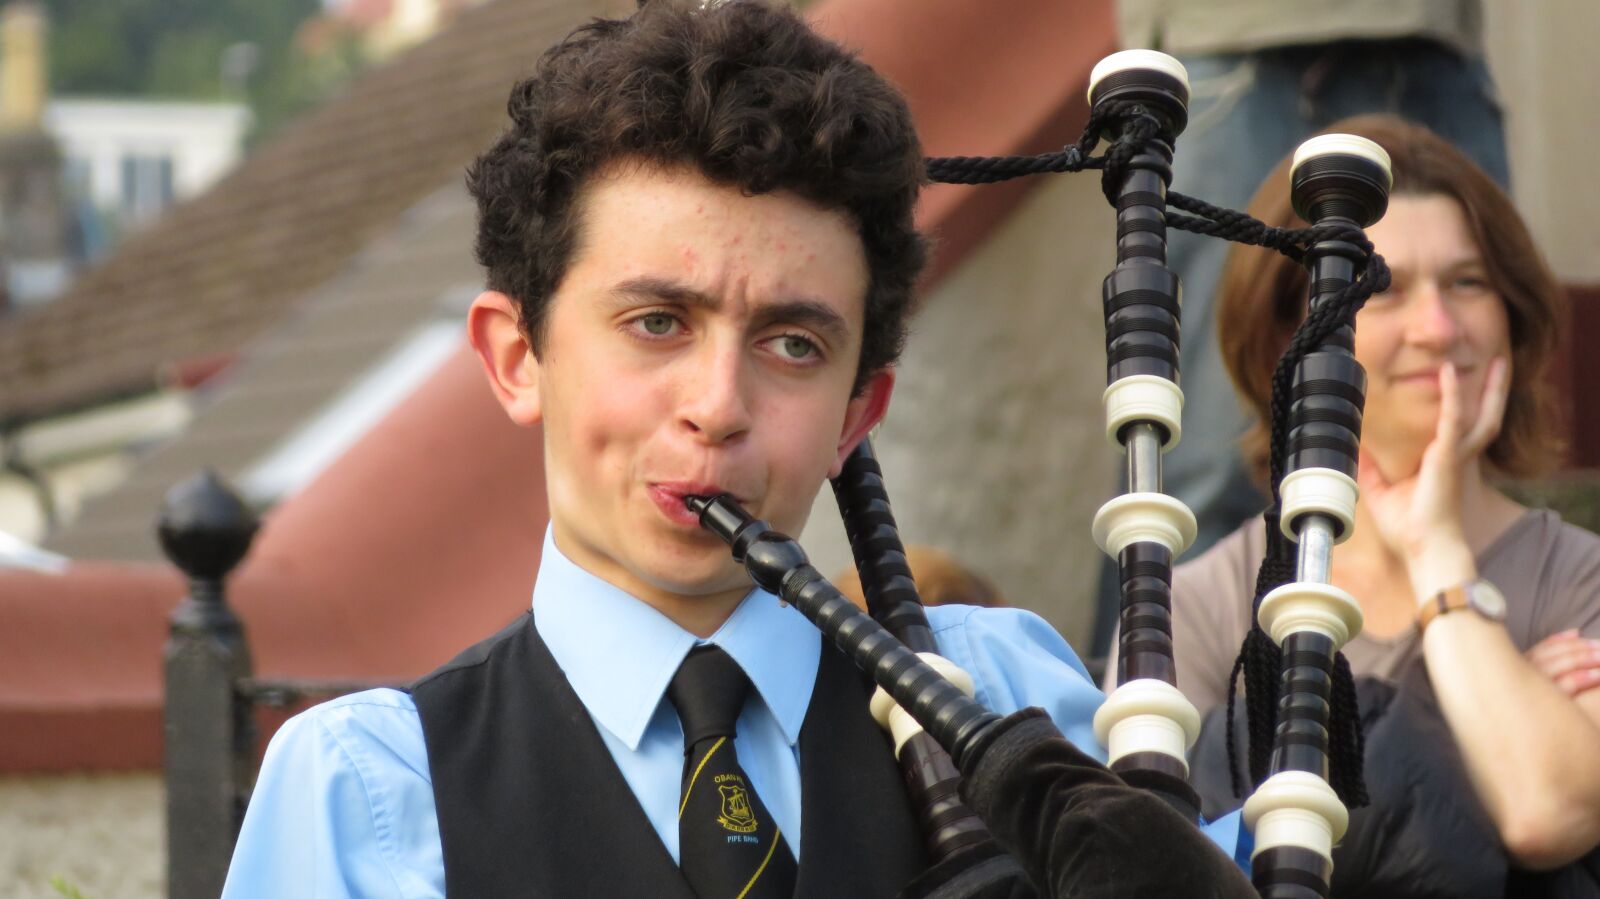 Canon PowerShot SX720 HS sample photo. Bagpipes, scotland, young people photography